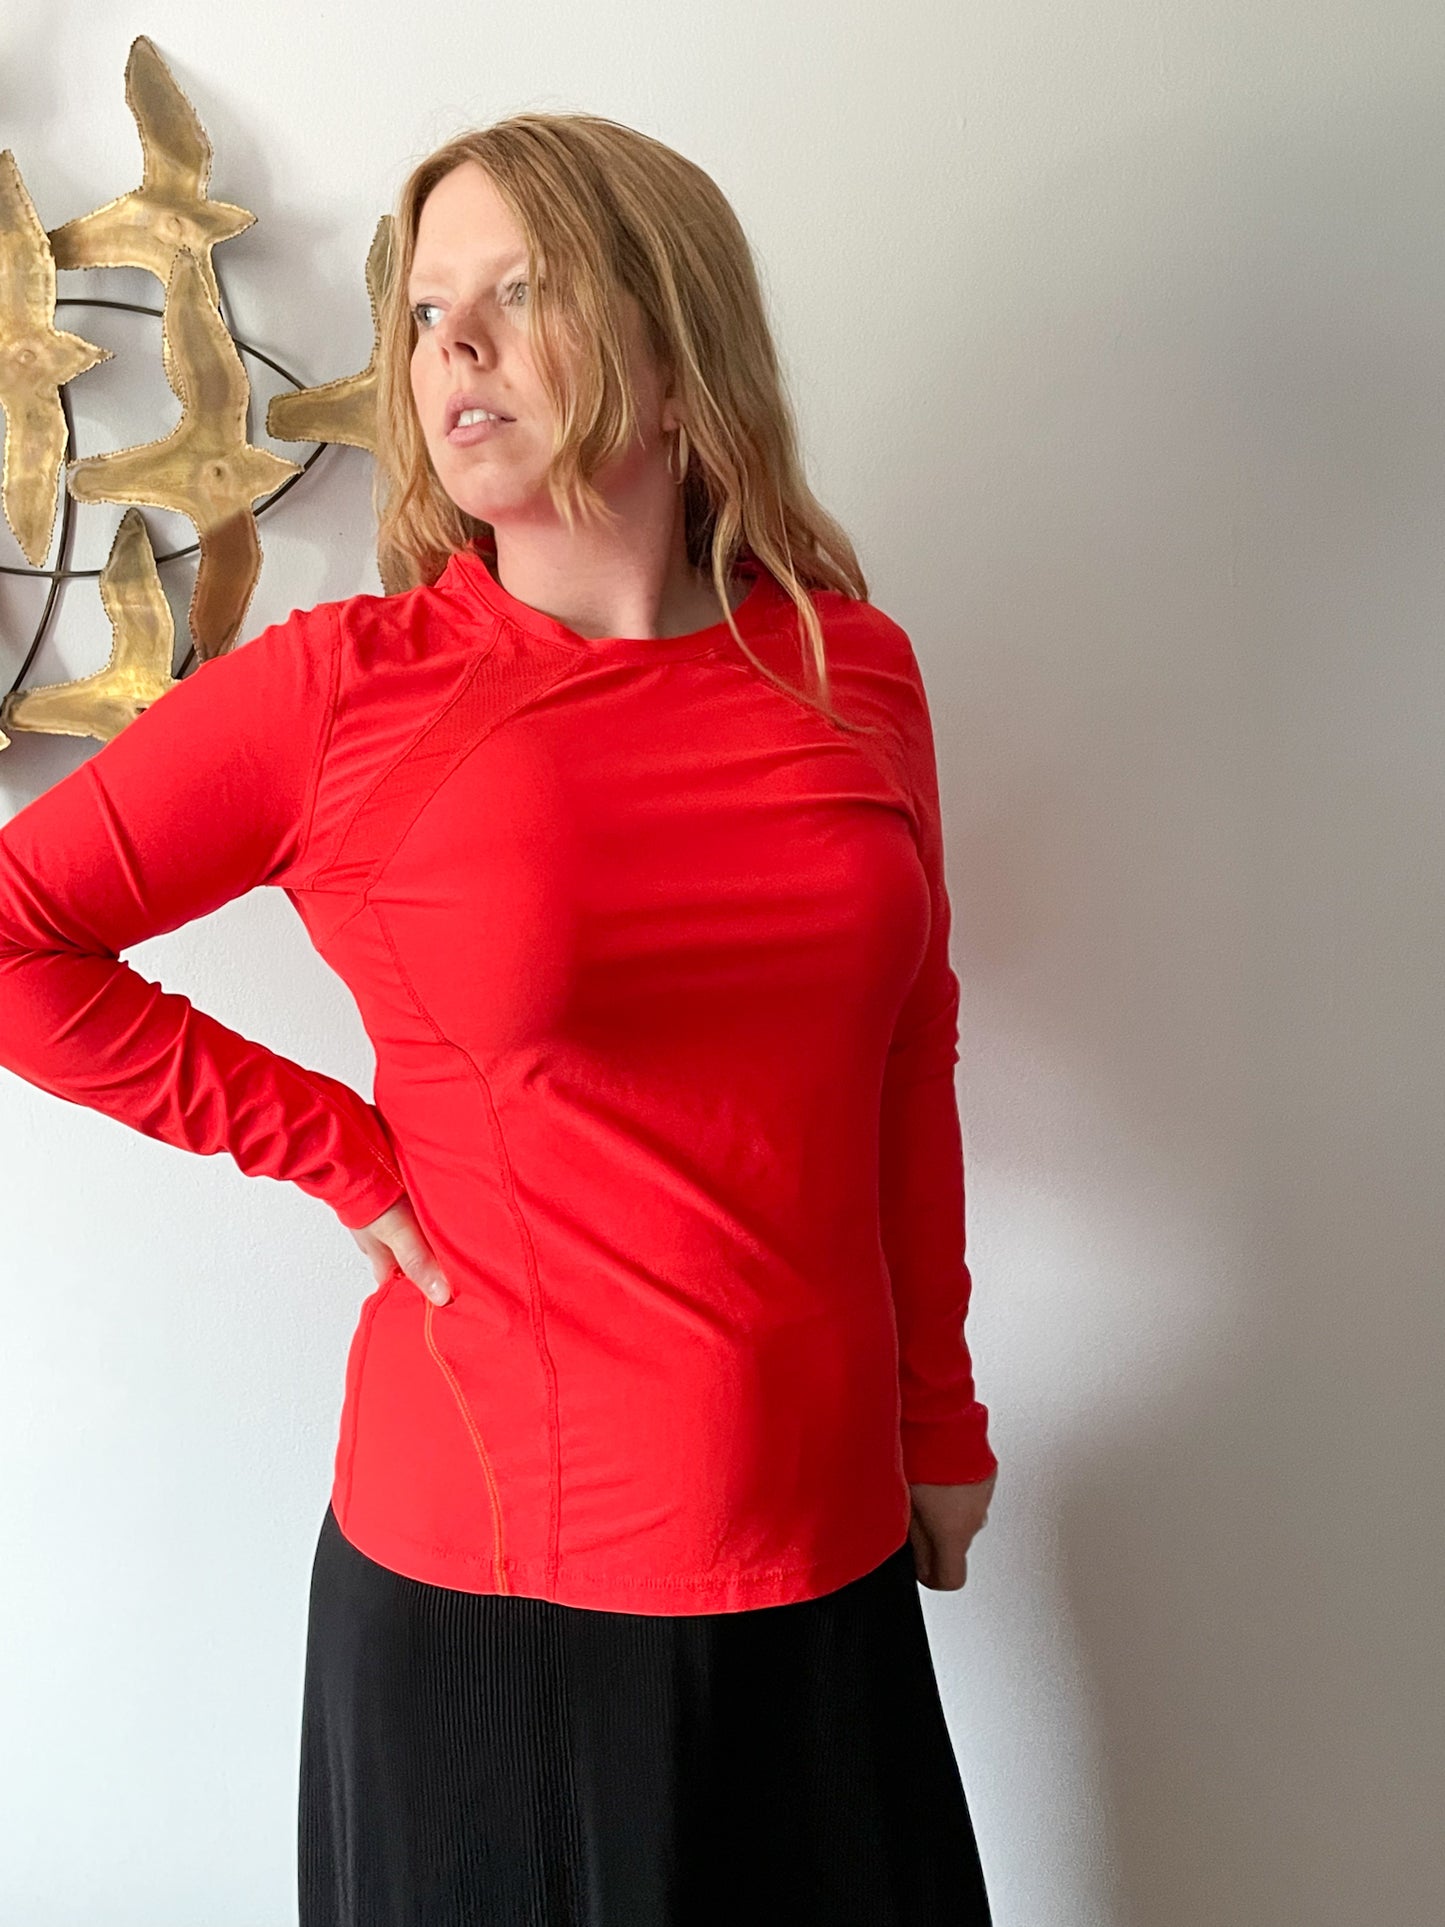 Running Room Red Fit Wear Long Sleeve Reflective Workout Top - Large